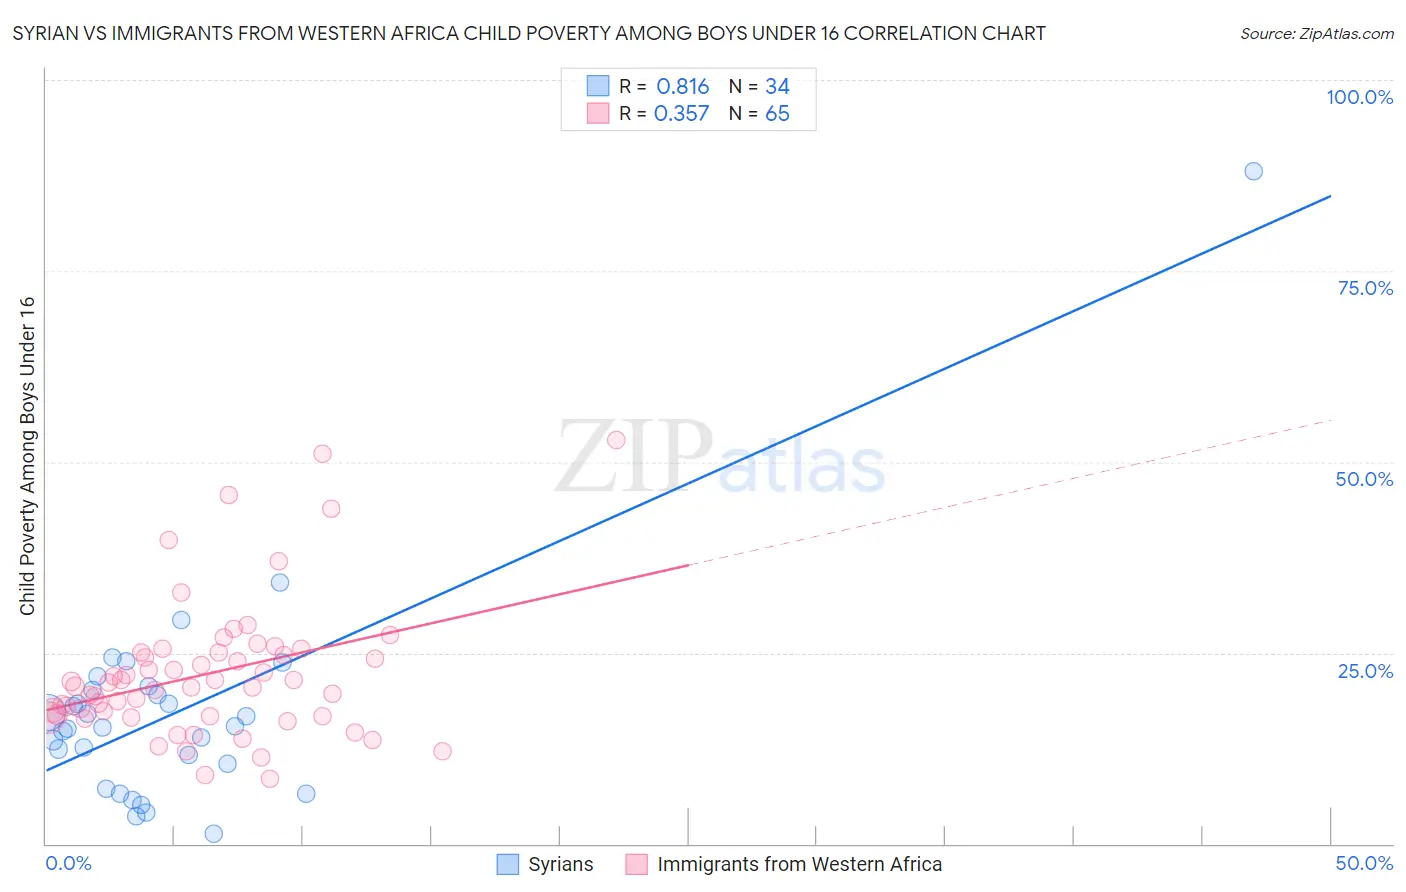 Syrian vs Immigrants from Western Africa Child Poverty Among Boys Under 16